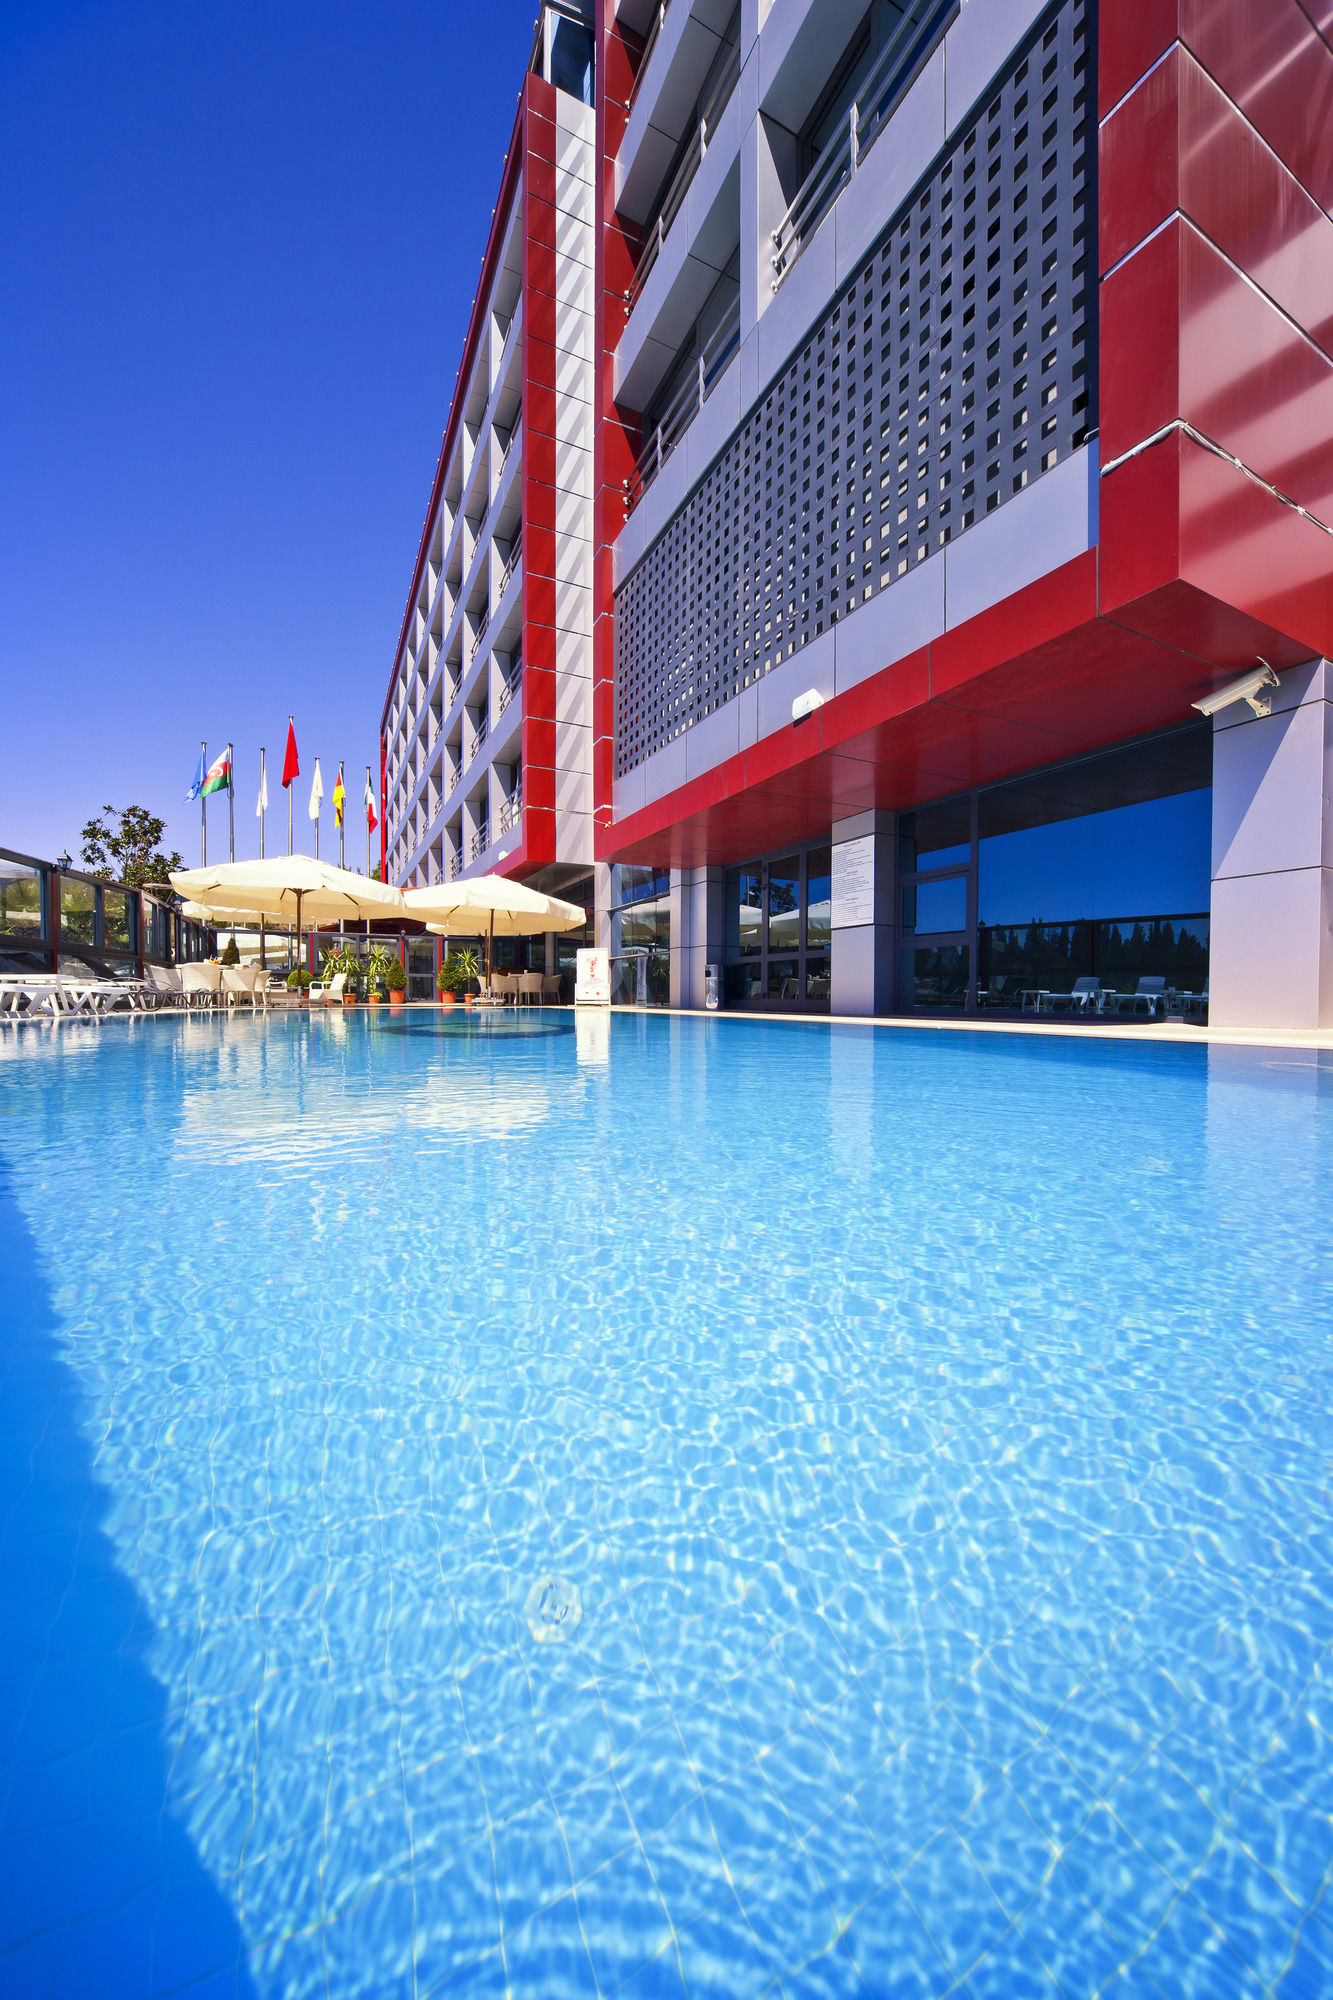 Volley Hotel Istanbul